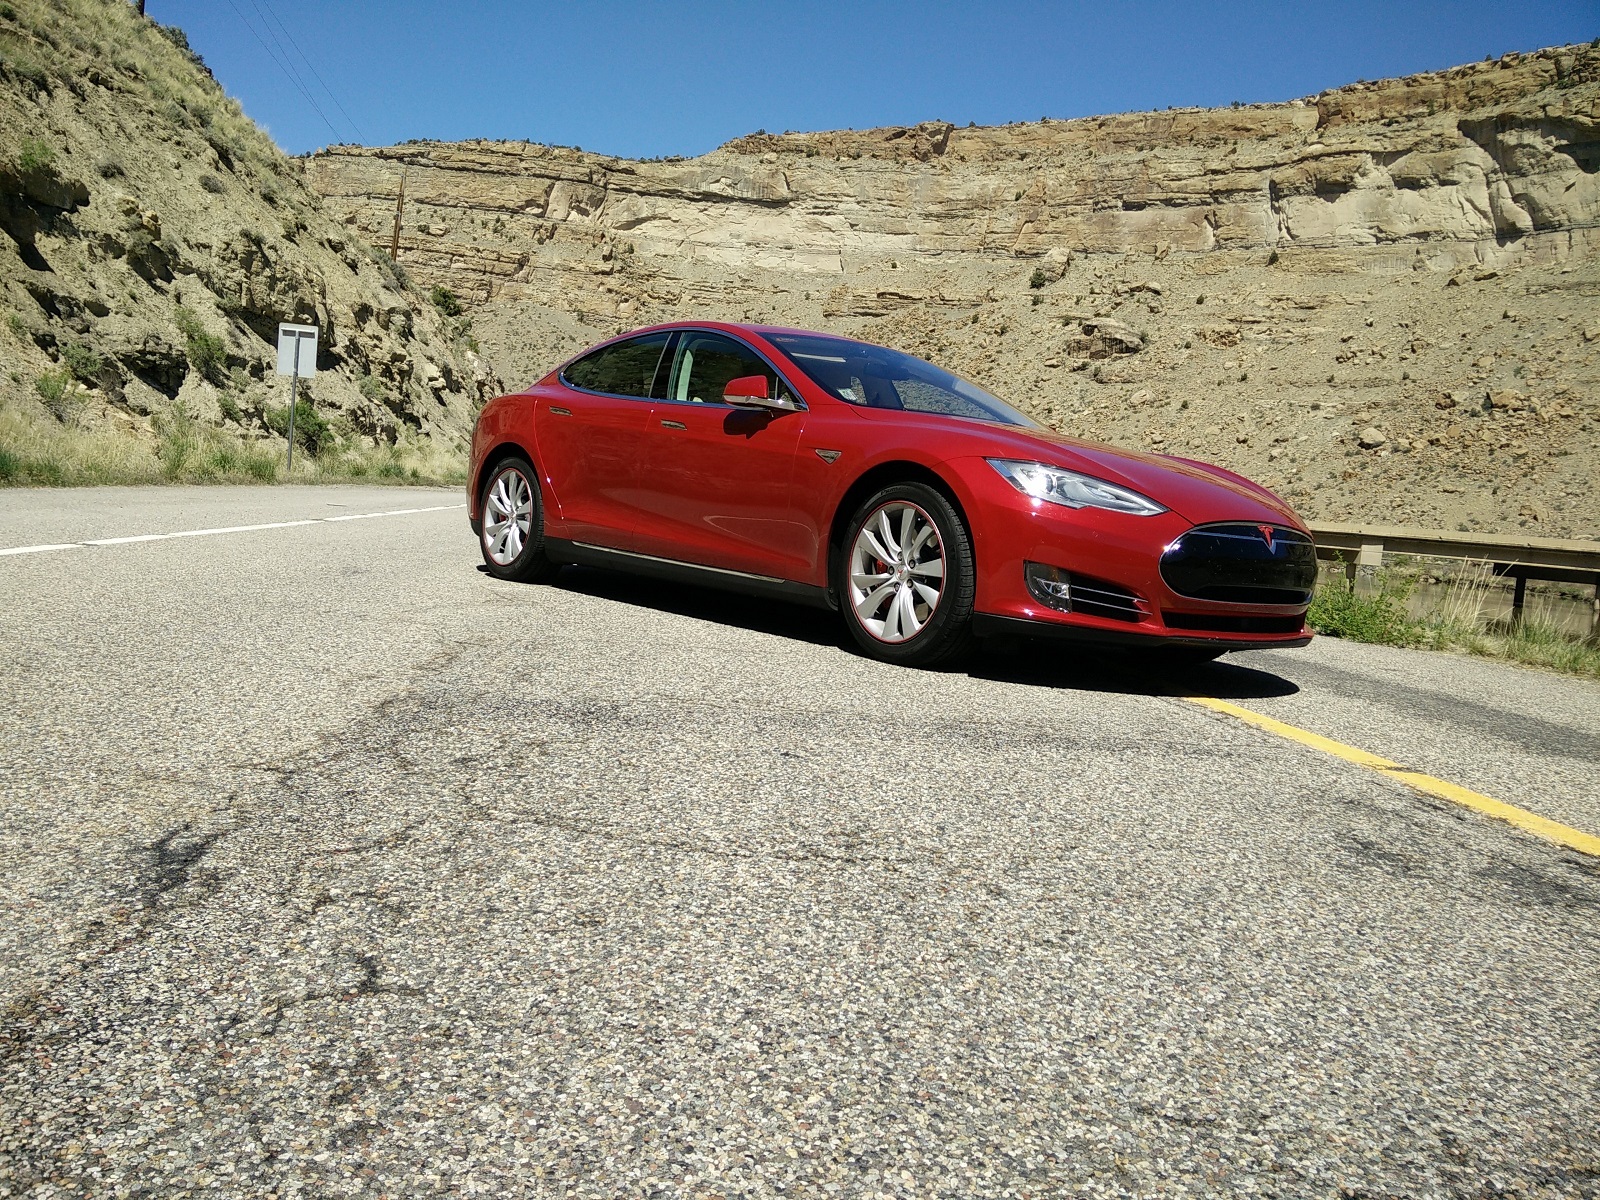 Tesla Model S Too Many Problems To Recommend Consumer